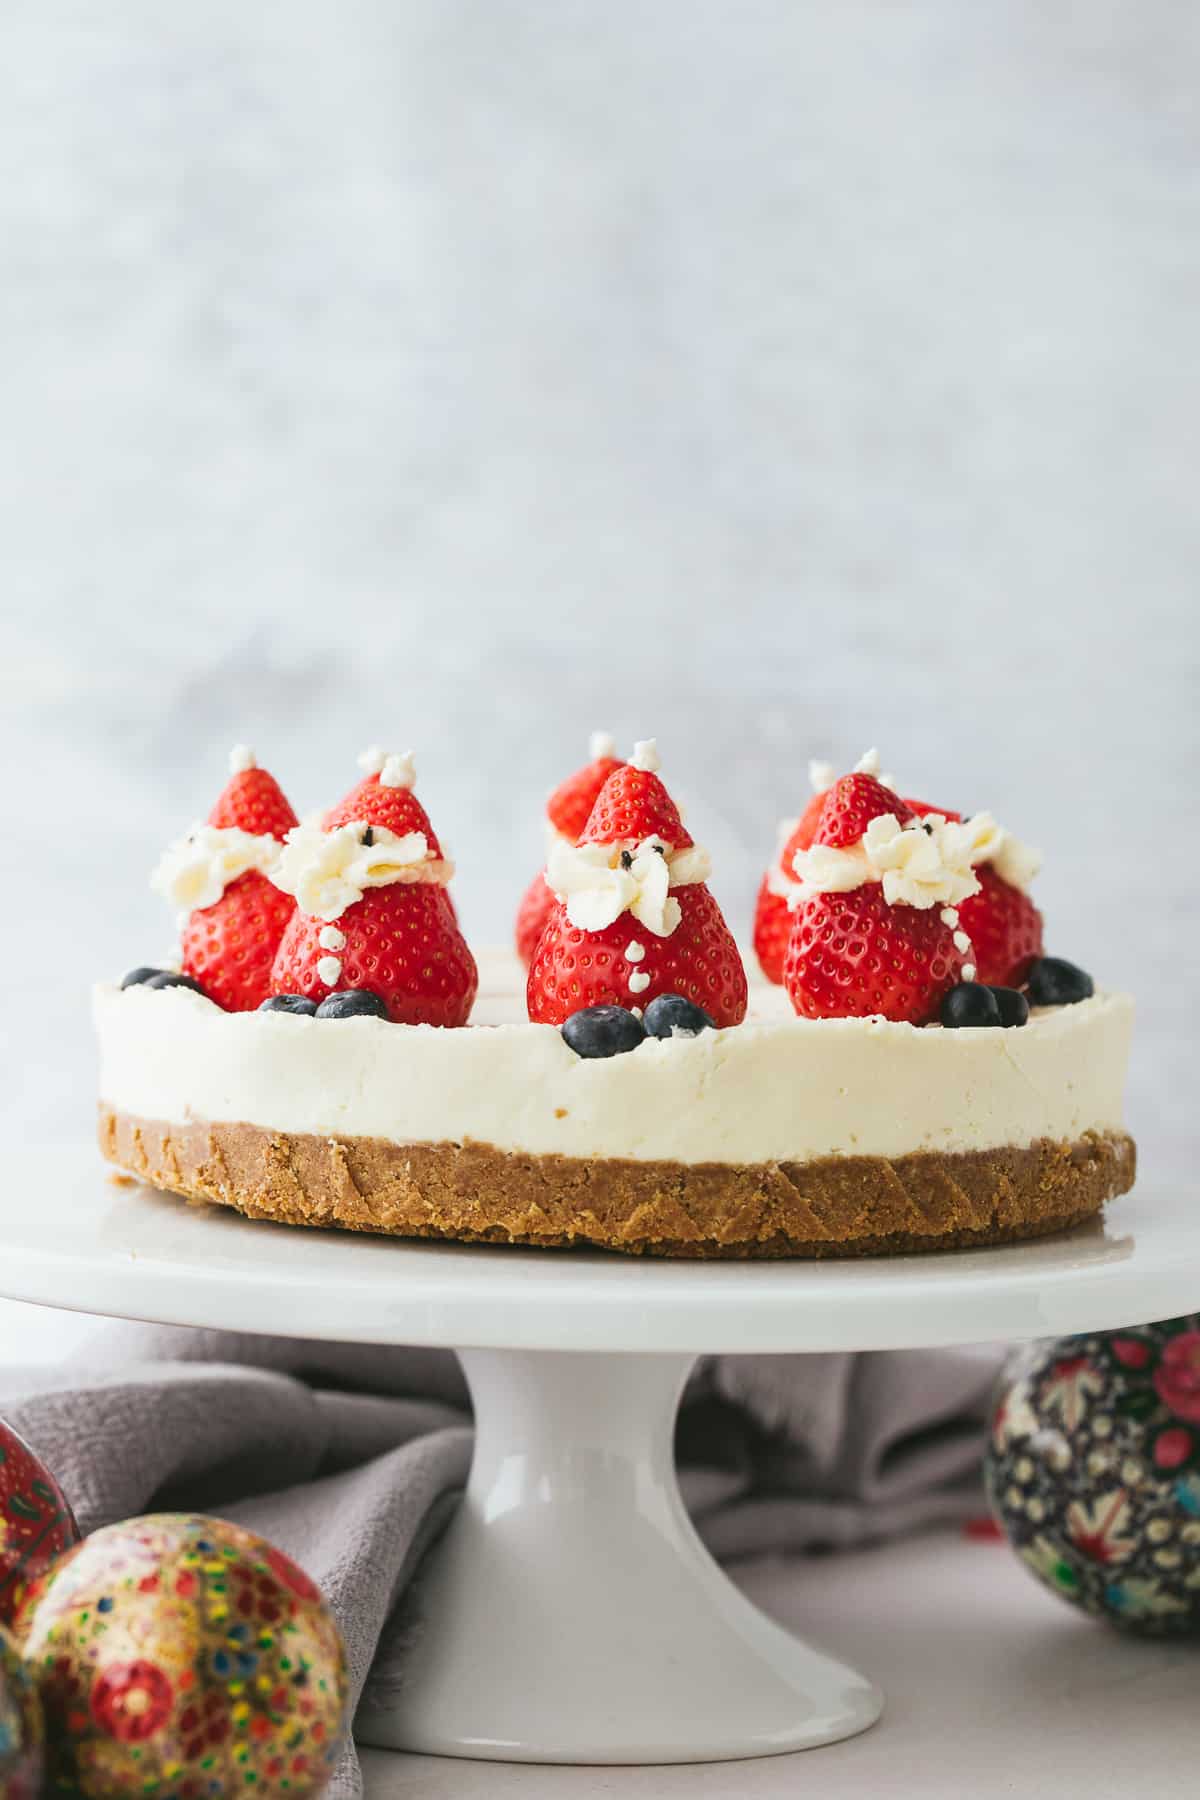 A white chocolate cheesecake with a gingernut biscuit base. There are strawberries on top of the cheesecake that have been made to look like Santas. 